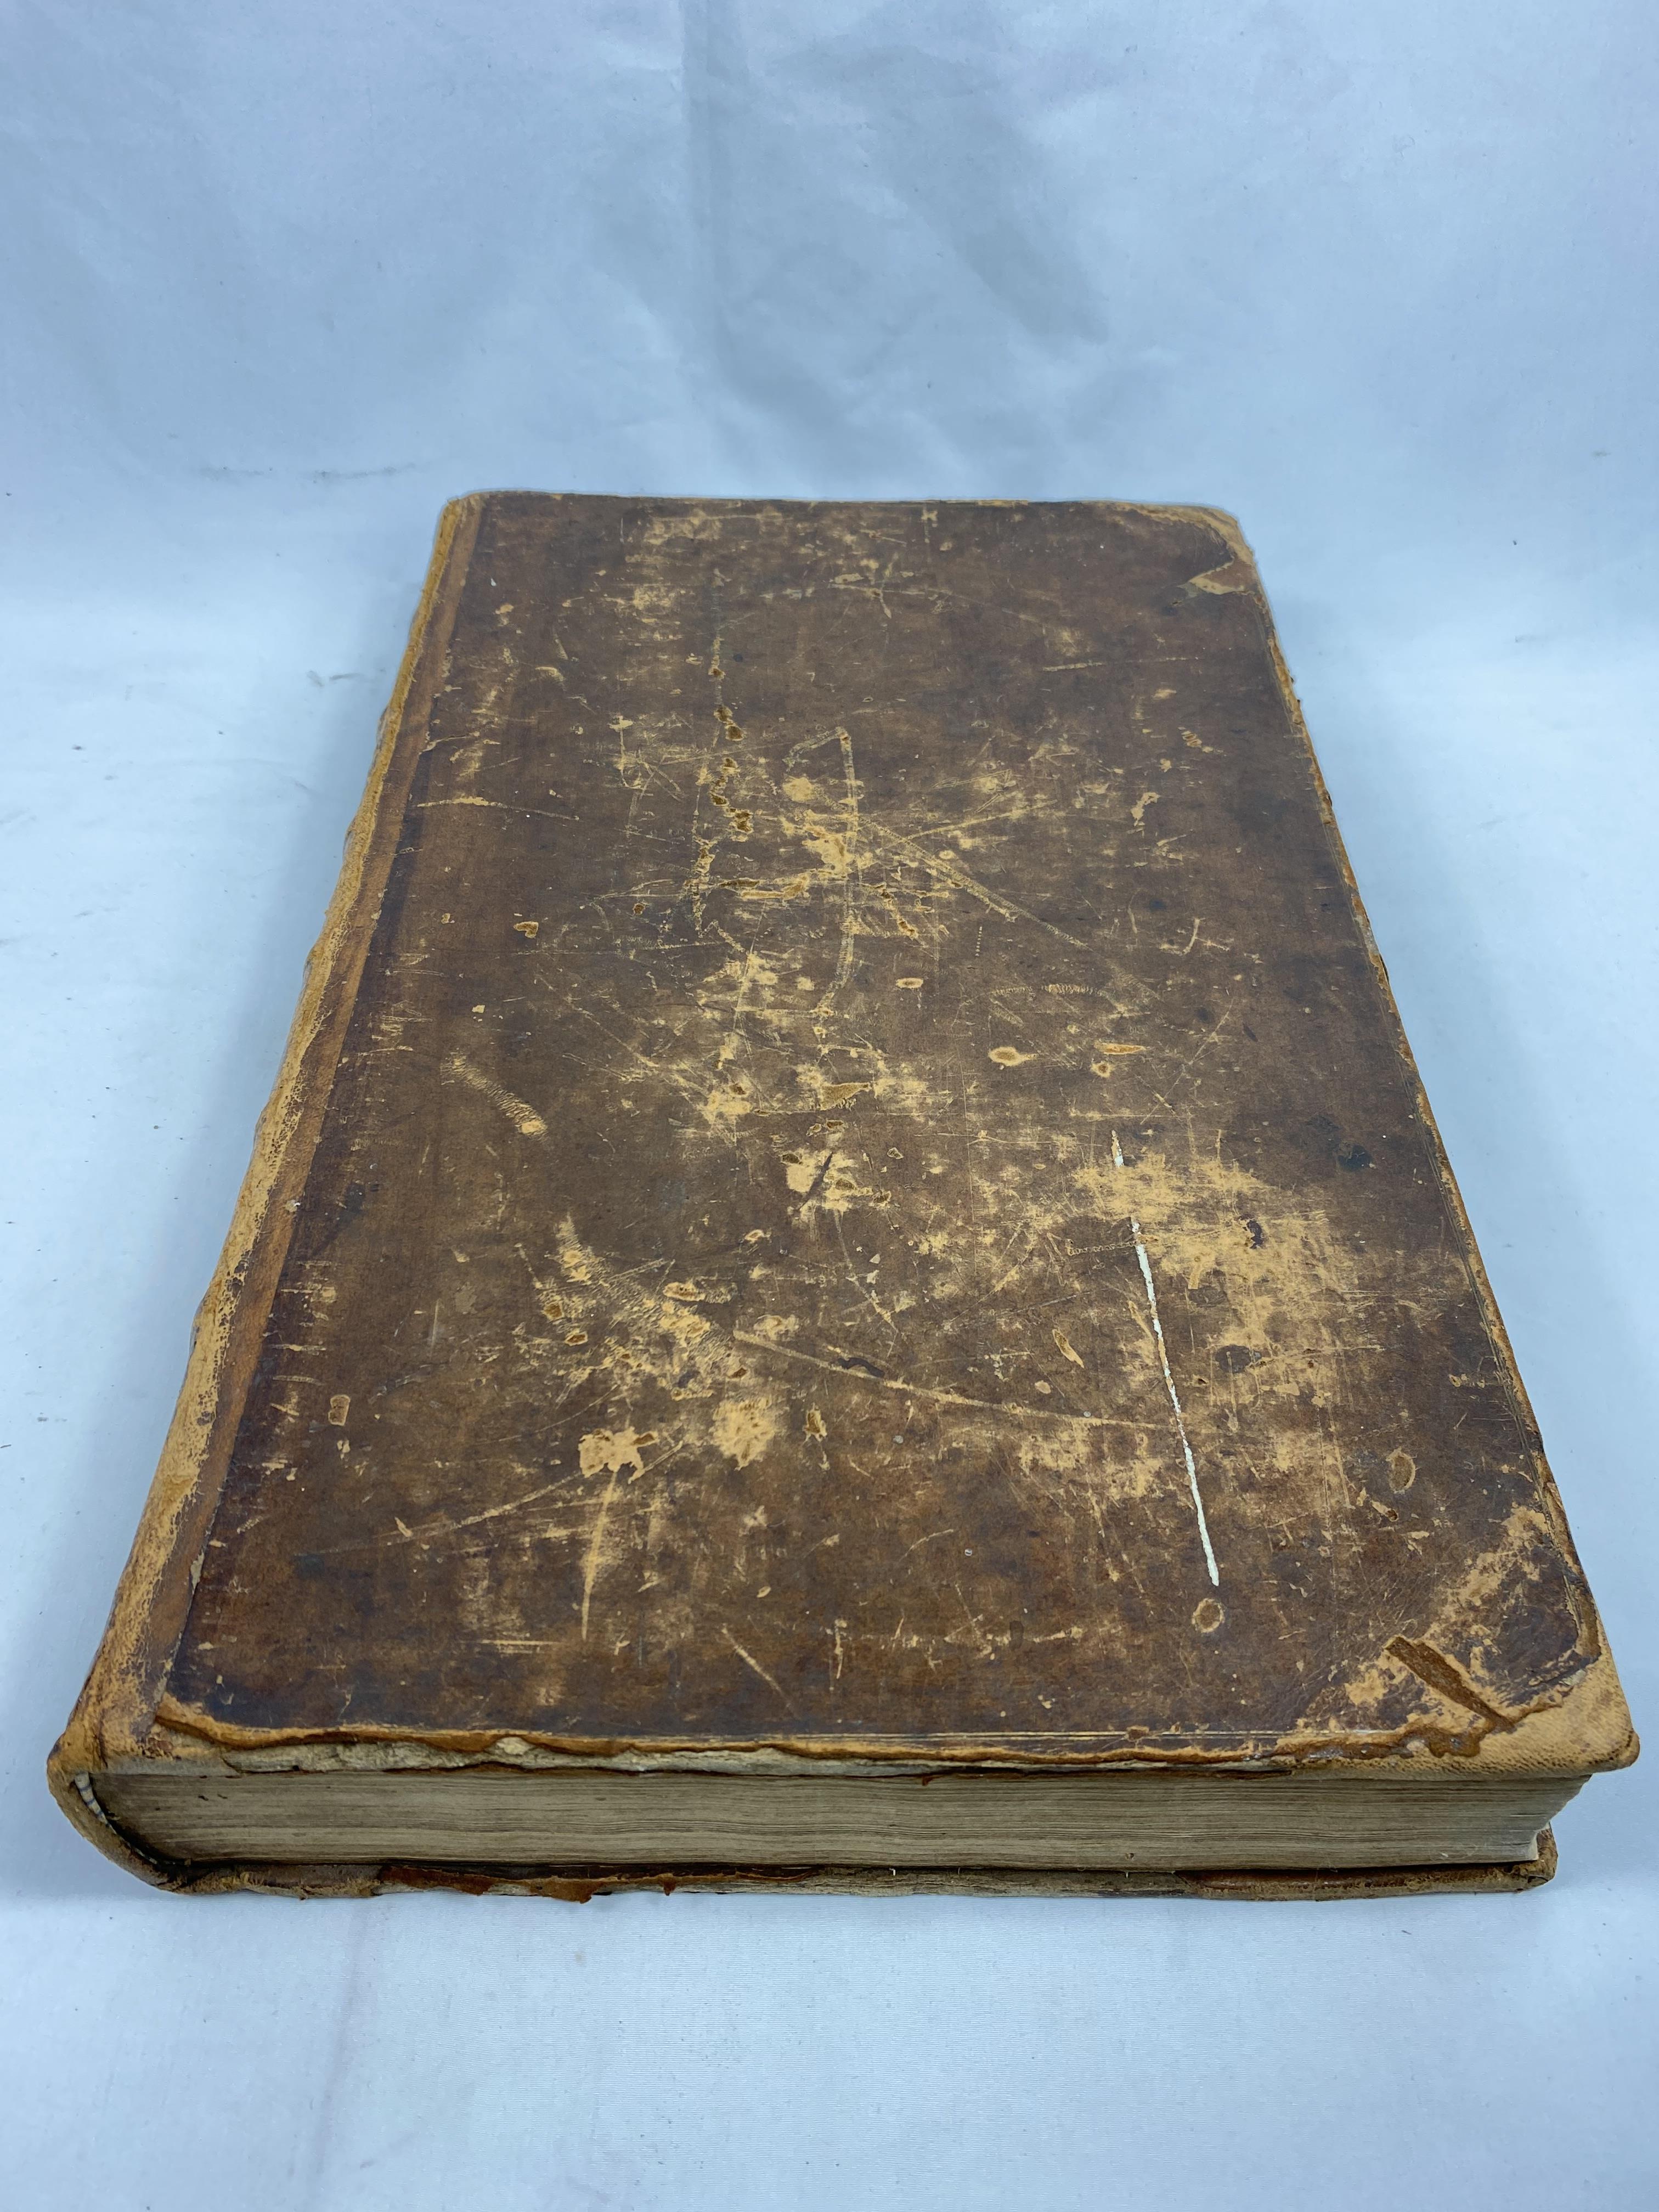 A New and Complete History of England by Temple Sydney, printed for J. Cooke 1773